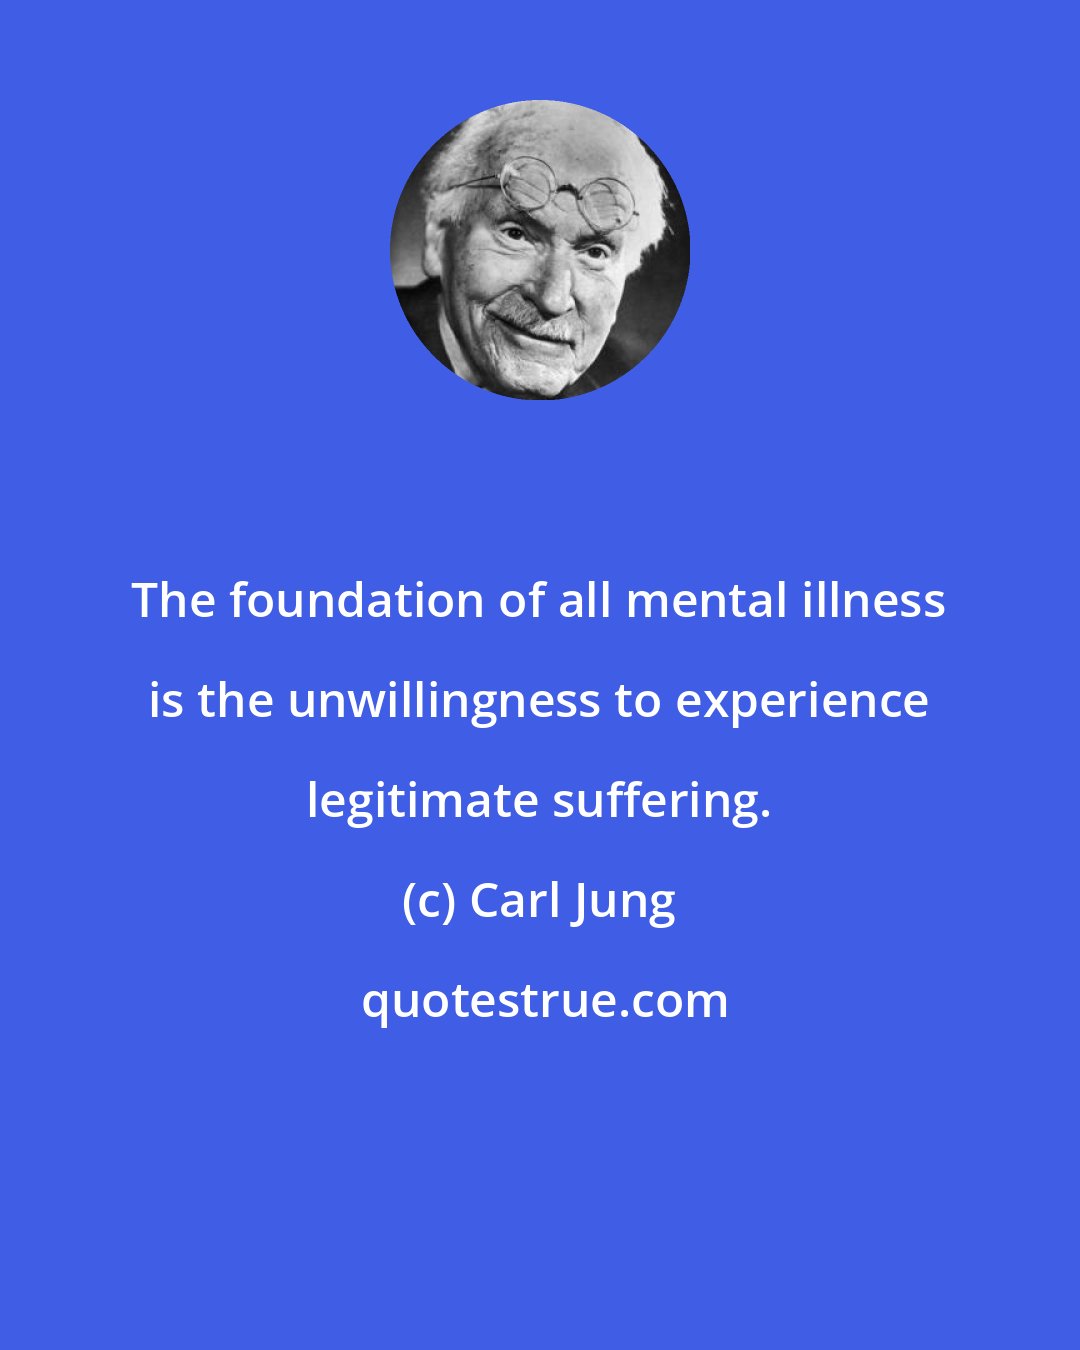 Carl Jung: The foundation of all mental illness is the unwillingness to experience legitimate suffering.